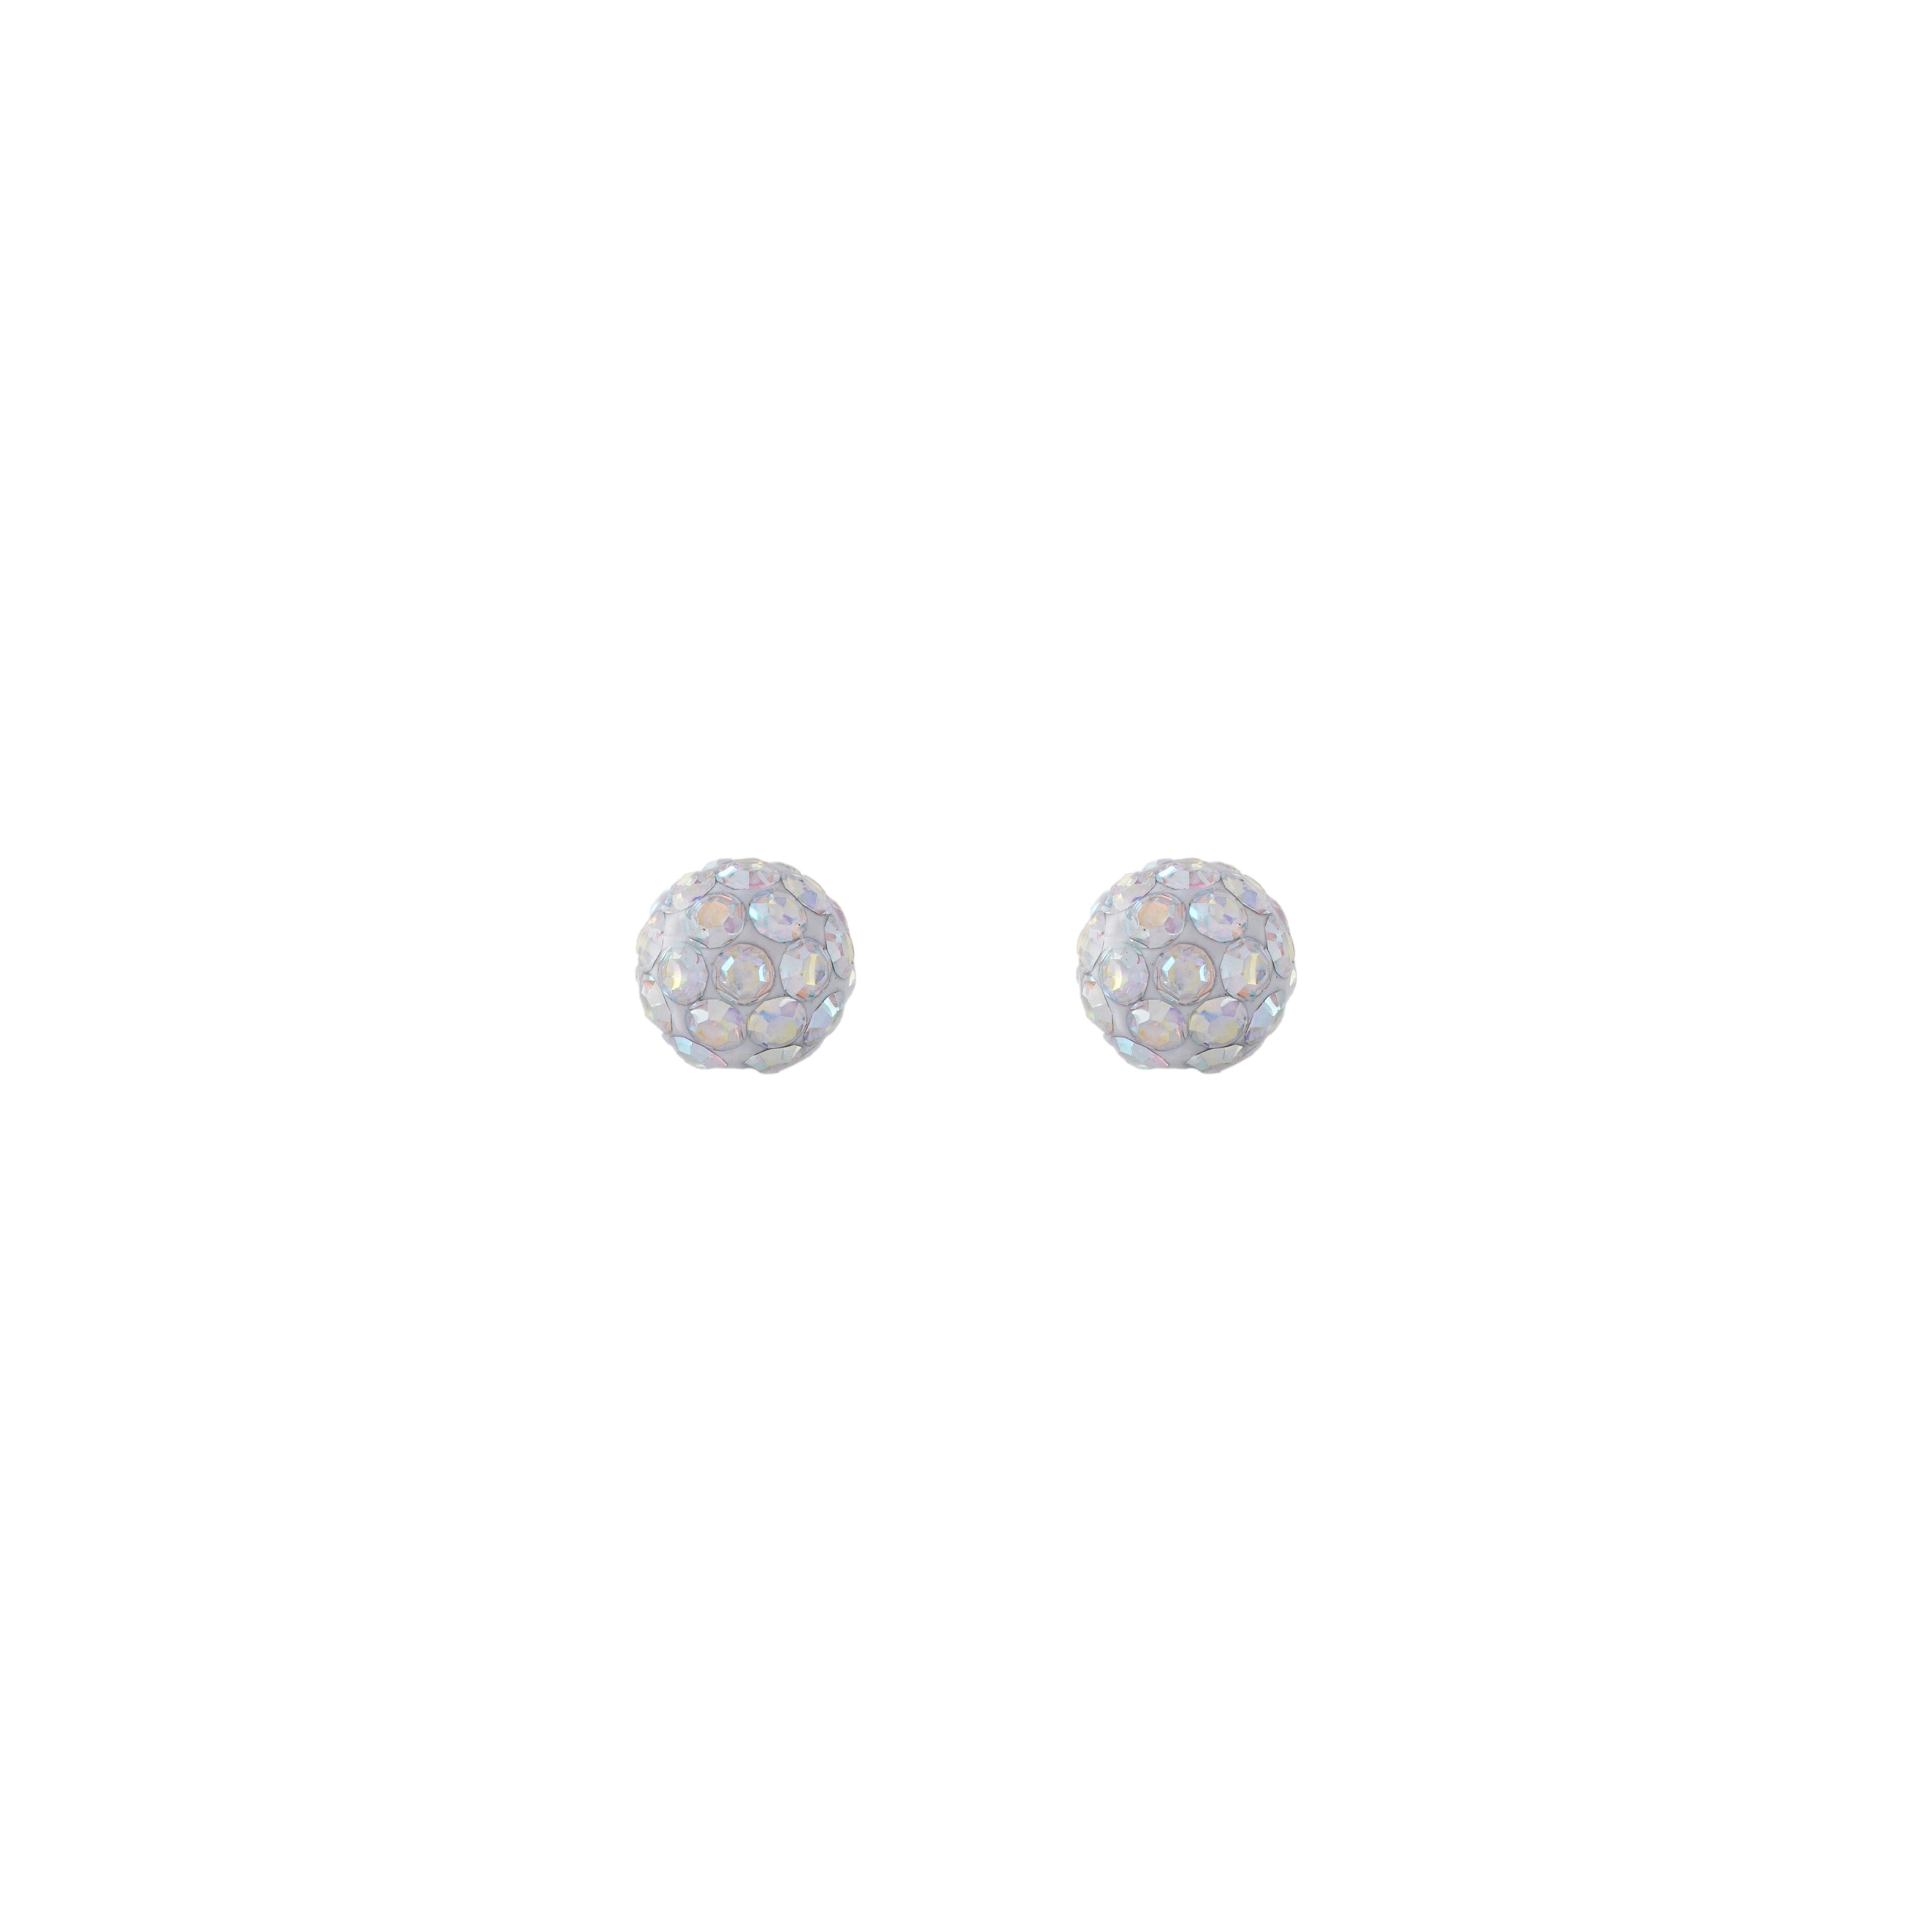 4.5MM Fireball Ð Ab Crystal Allergy free Stainless Steel Ear Studs | MADE IN USA | Ideal for everyday wear